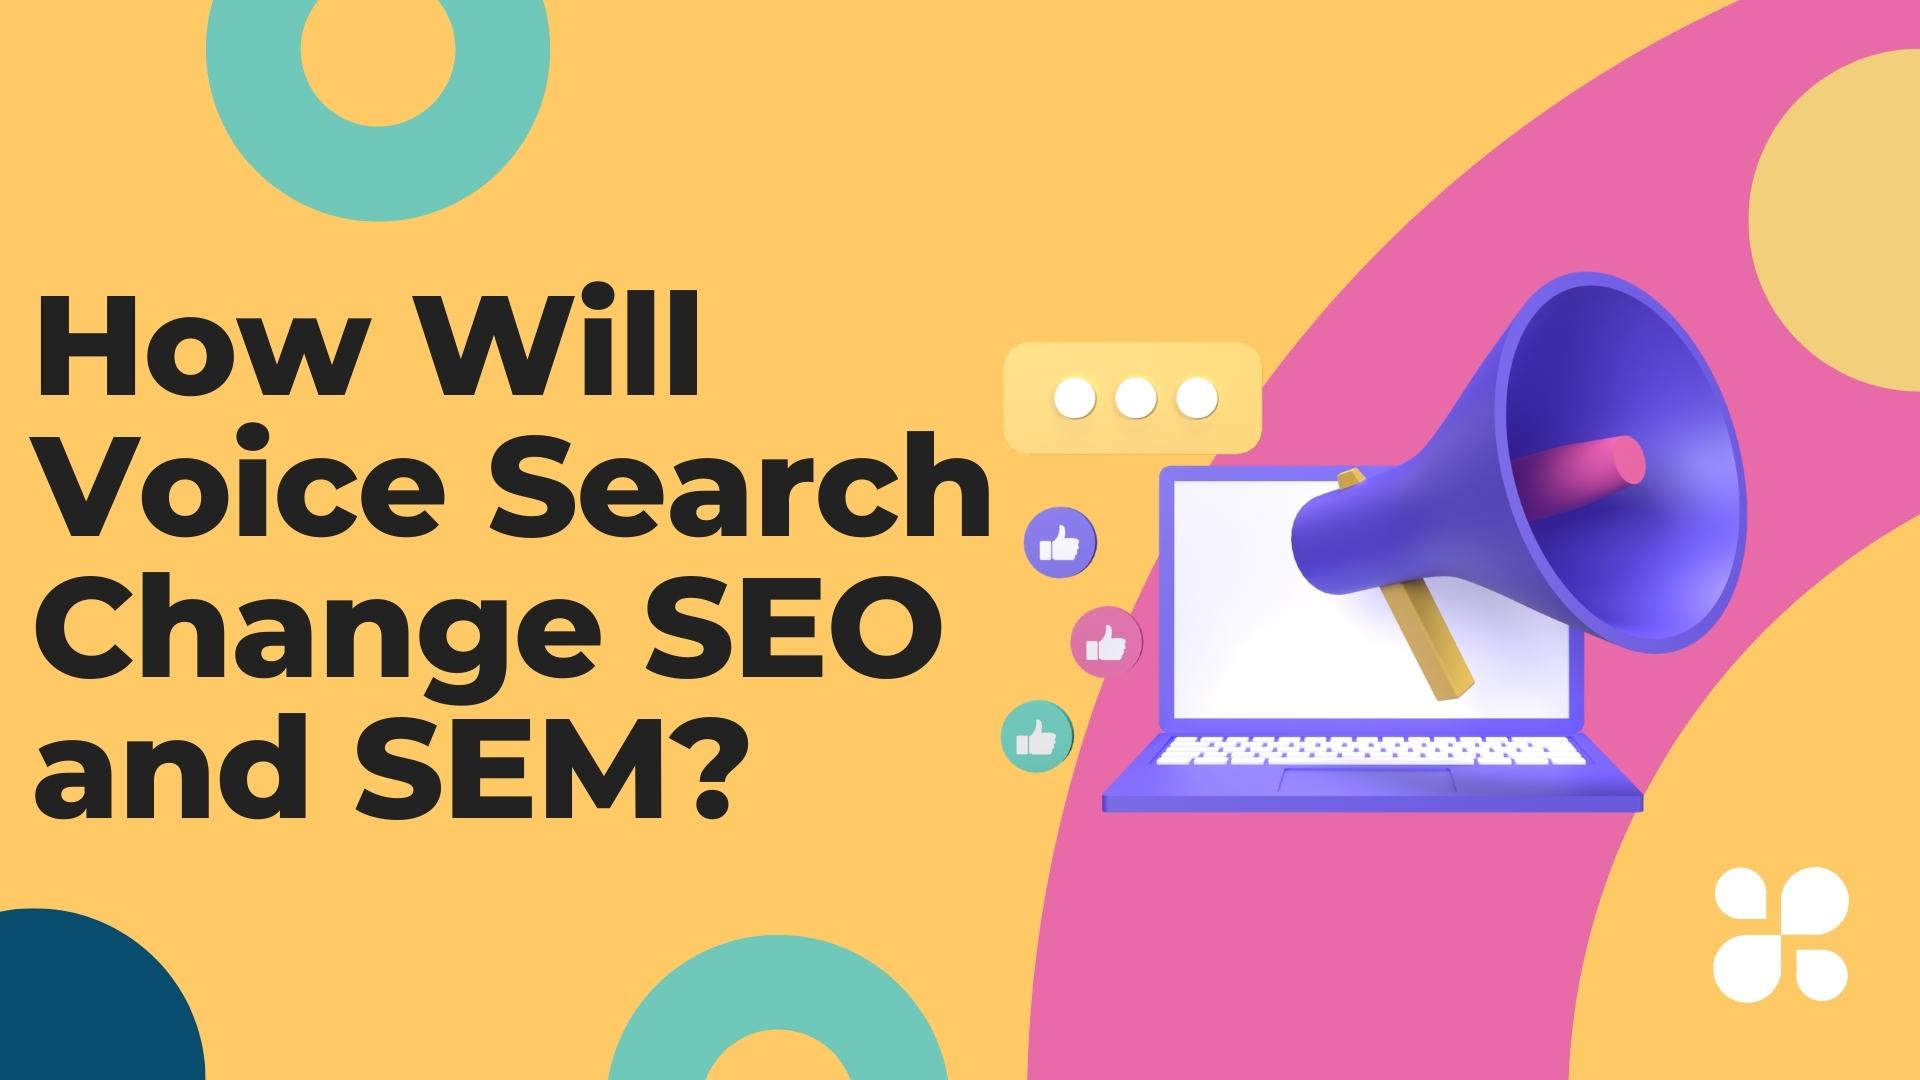 How Will Voice Search Change SEO and SEM?